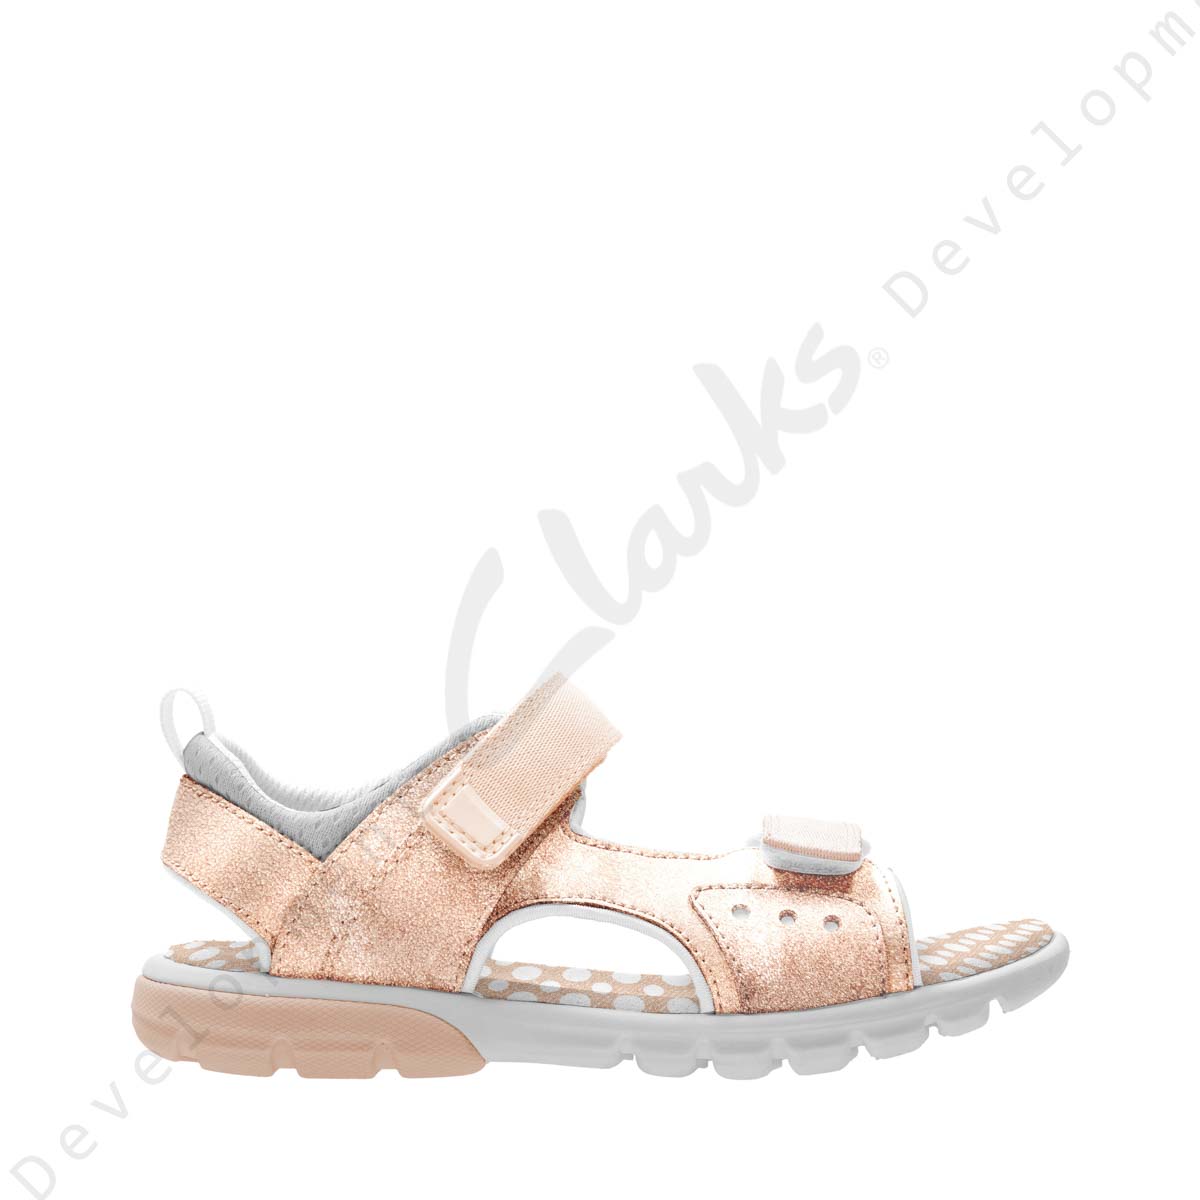 clarks pink shoes and sandals